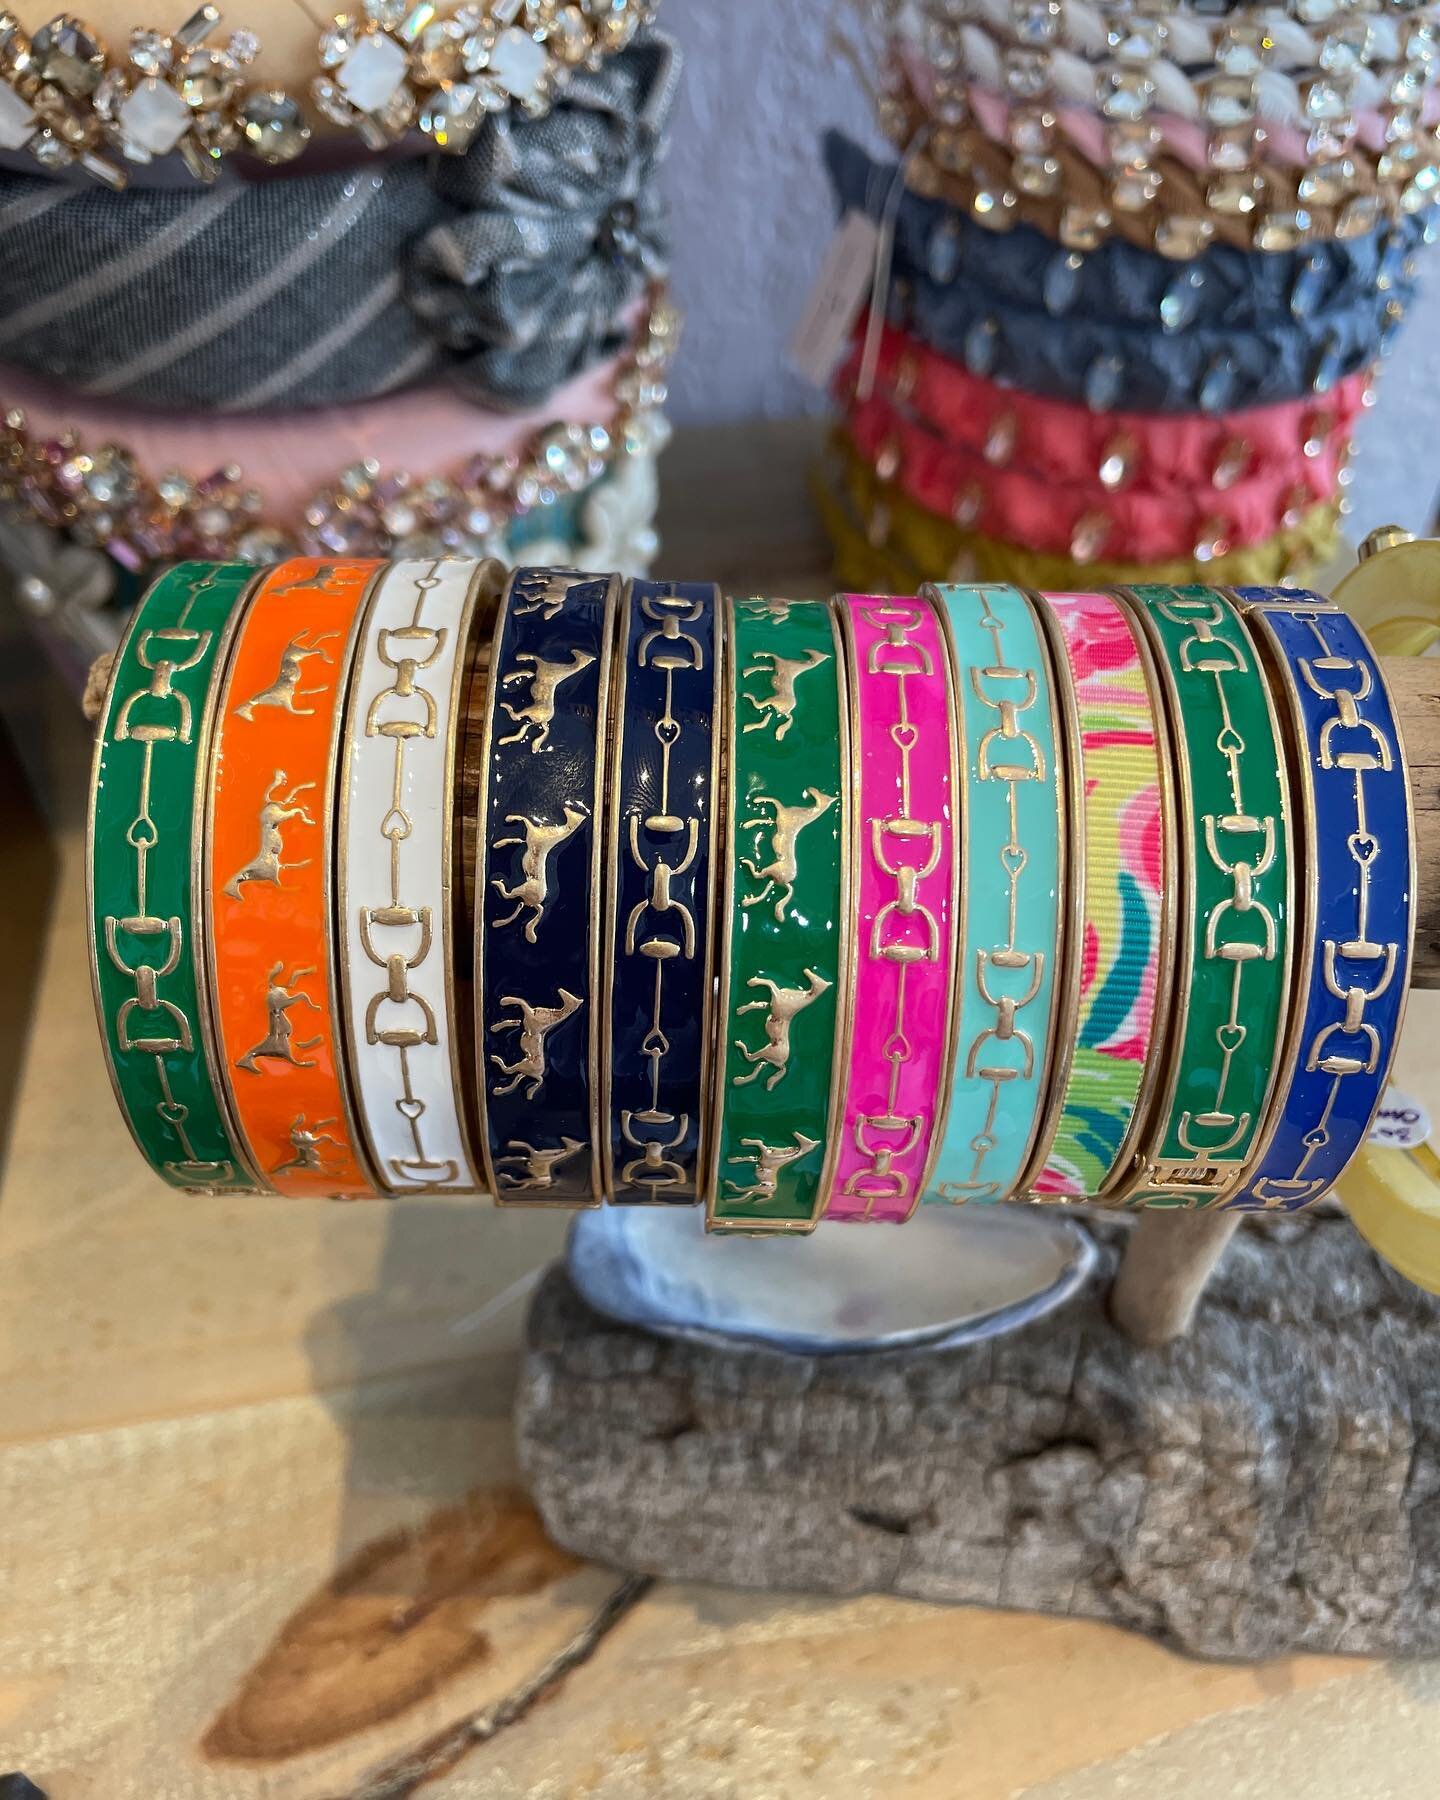 Build your enamel bangle collection! We love these fashion pieces as an addition to any stack!! 💎💜 

#shoplavenderpatch #perfectgift #beautifulday #treatmom #momsday #mothersdaygifts #latesttrend #sopretty #stackotd #horsebit #rodeofashion #downtow